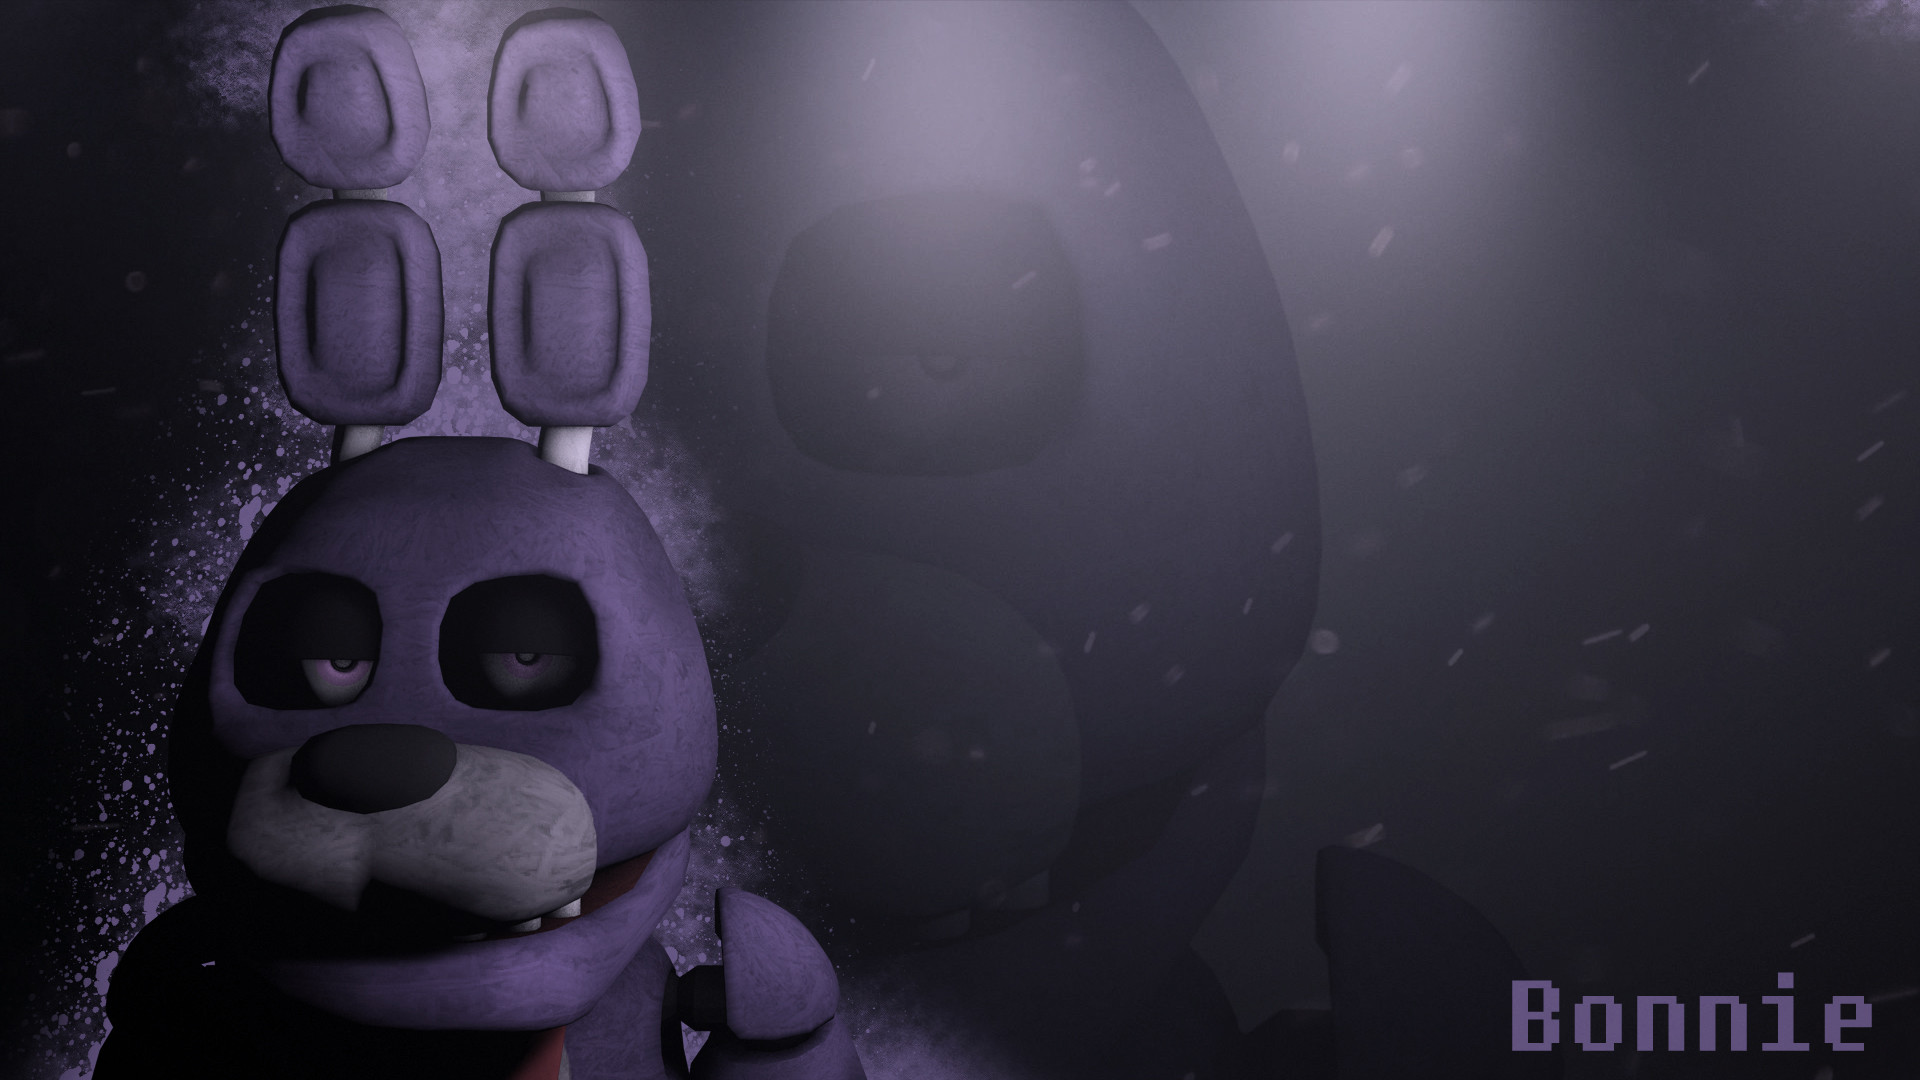 1920x1080 ... Five Nights at Freddy's Bonnie Wallpaper DOWNLOAD by NiksonYT